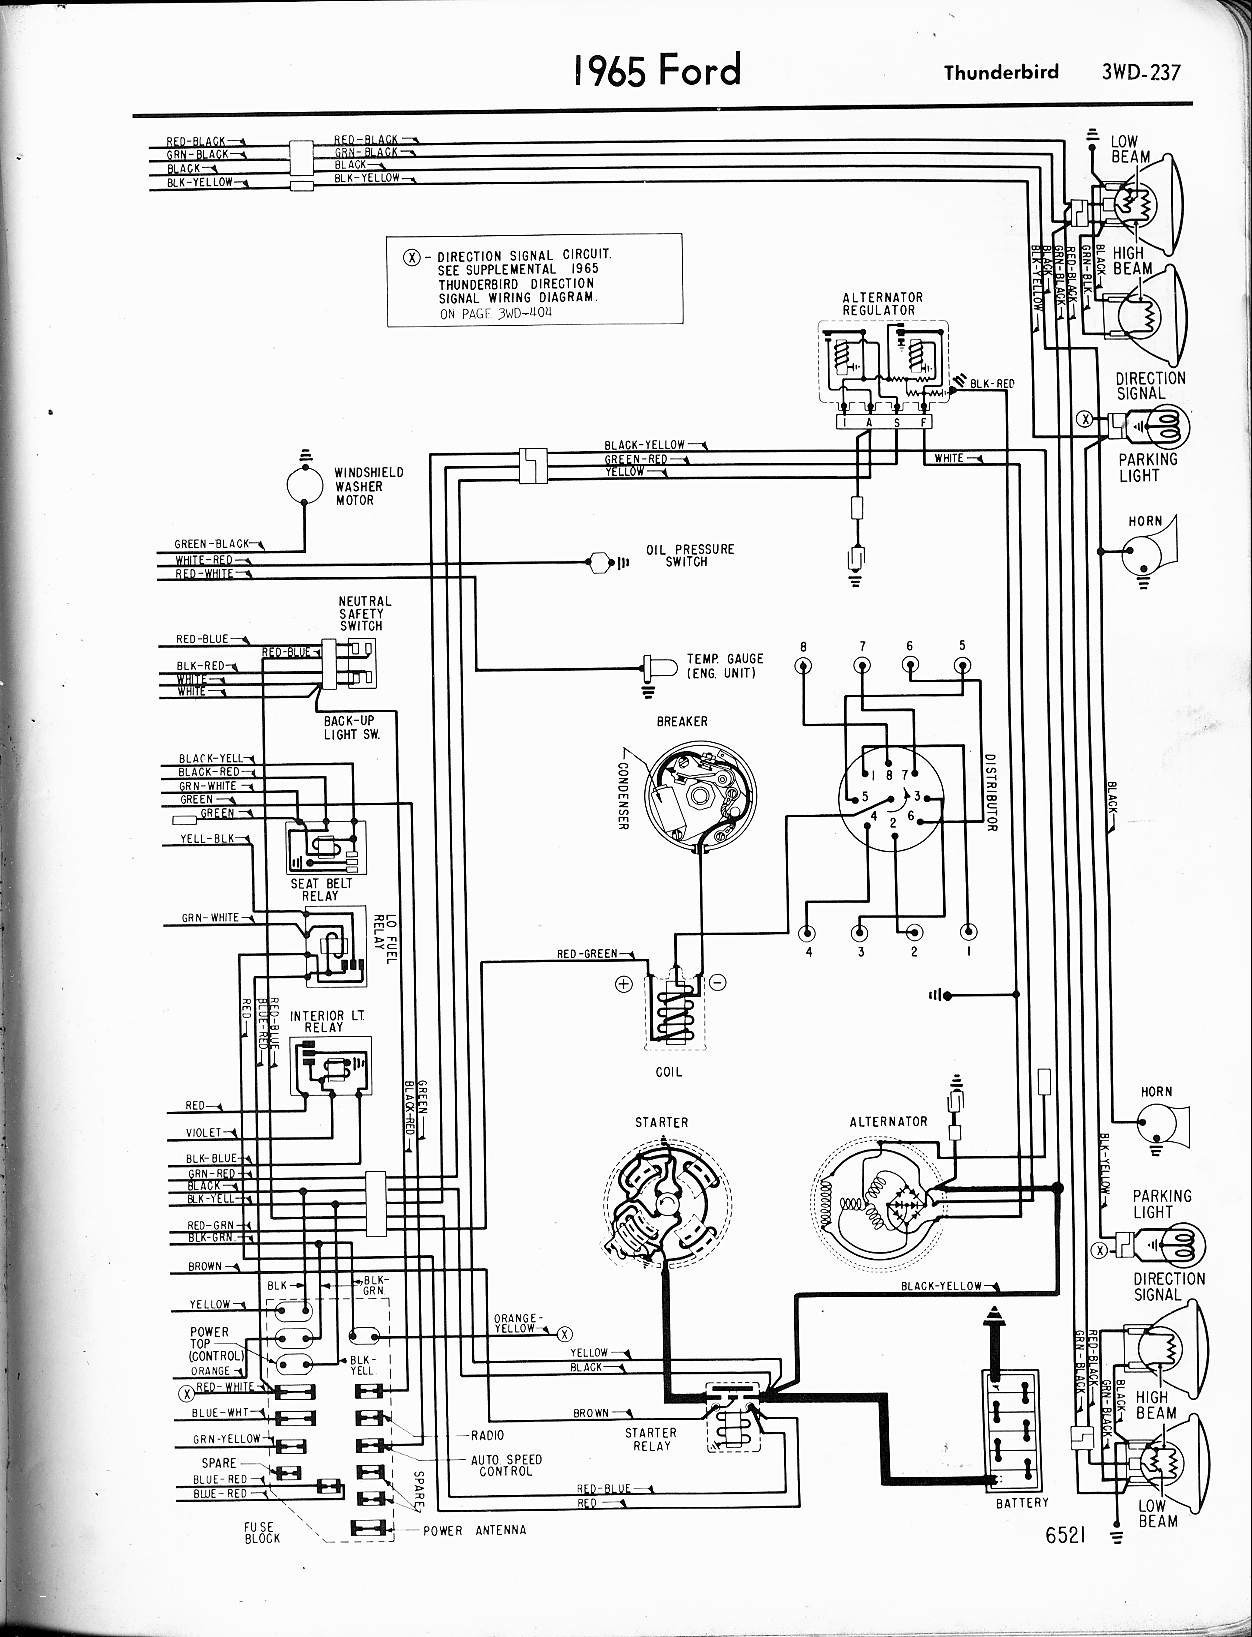 Alternator Wiring Diagram Ford Tractor Simple Tractor Wiring Diagram Alternator Valid Gm Alternator Wiring Diagram